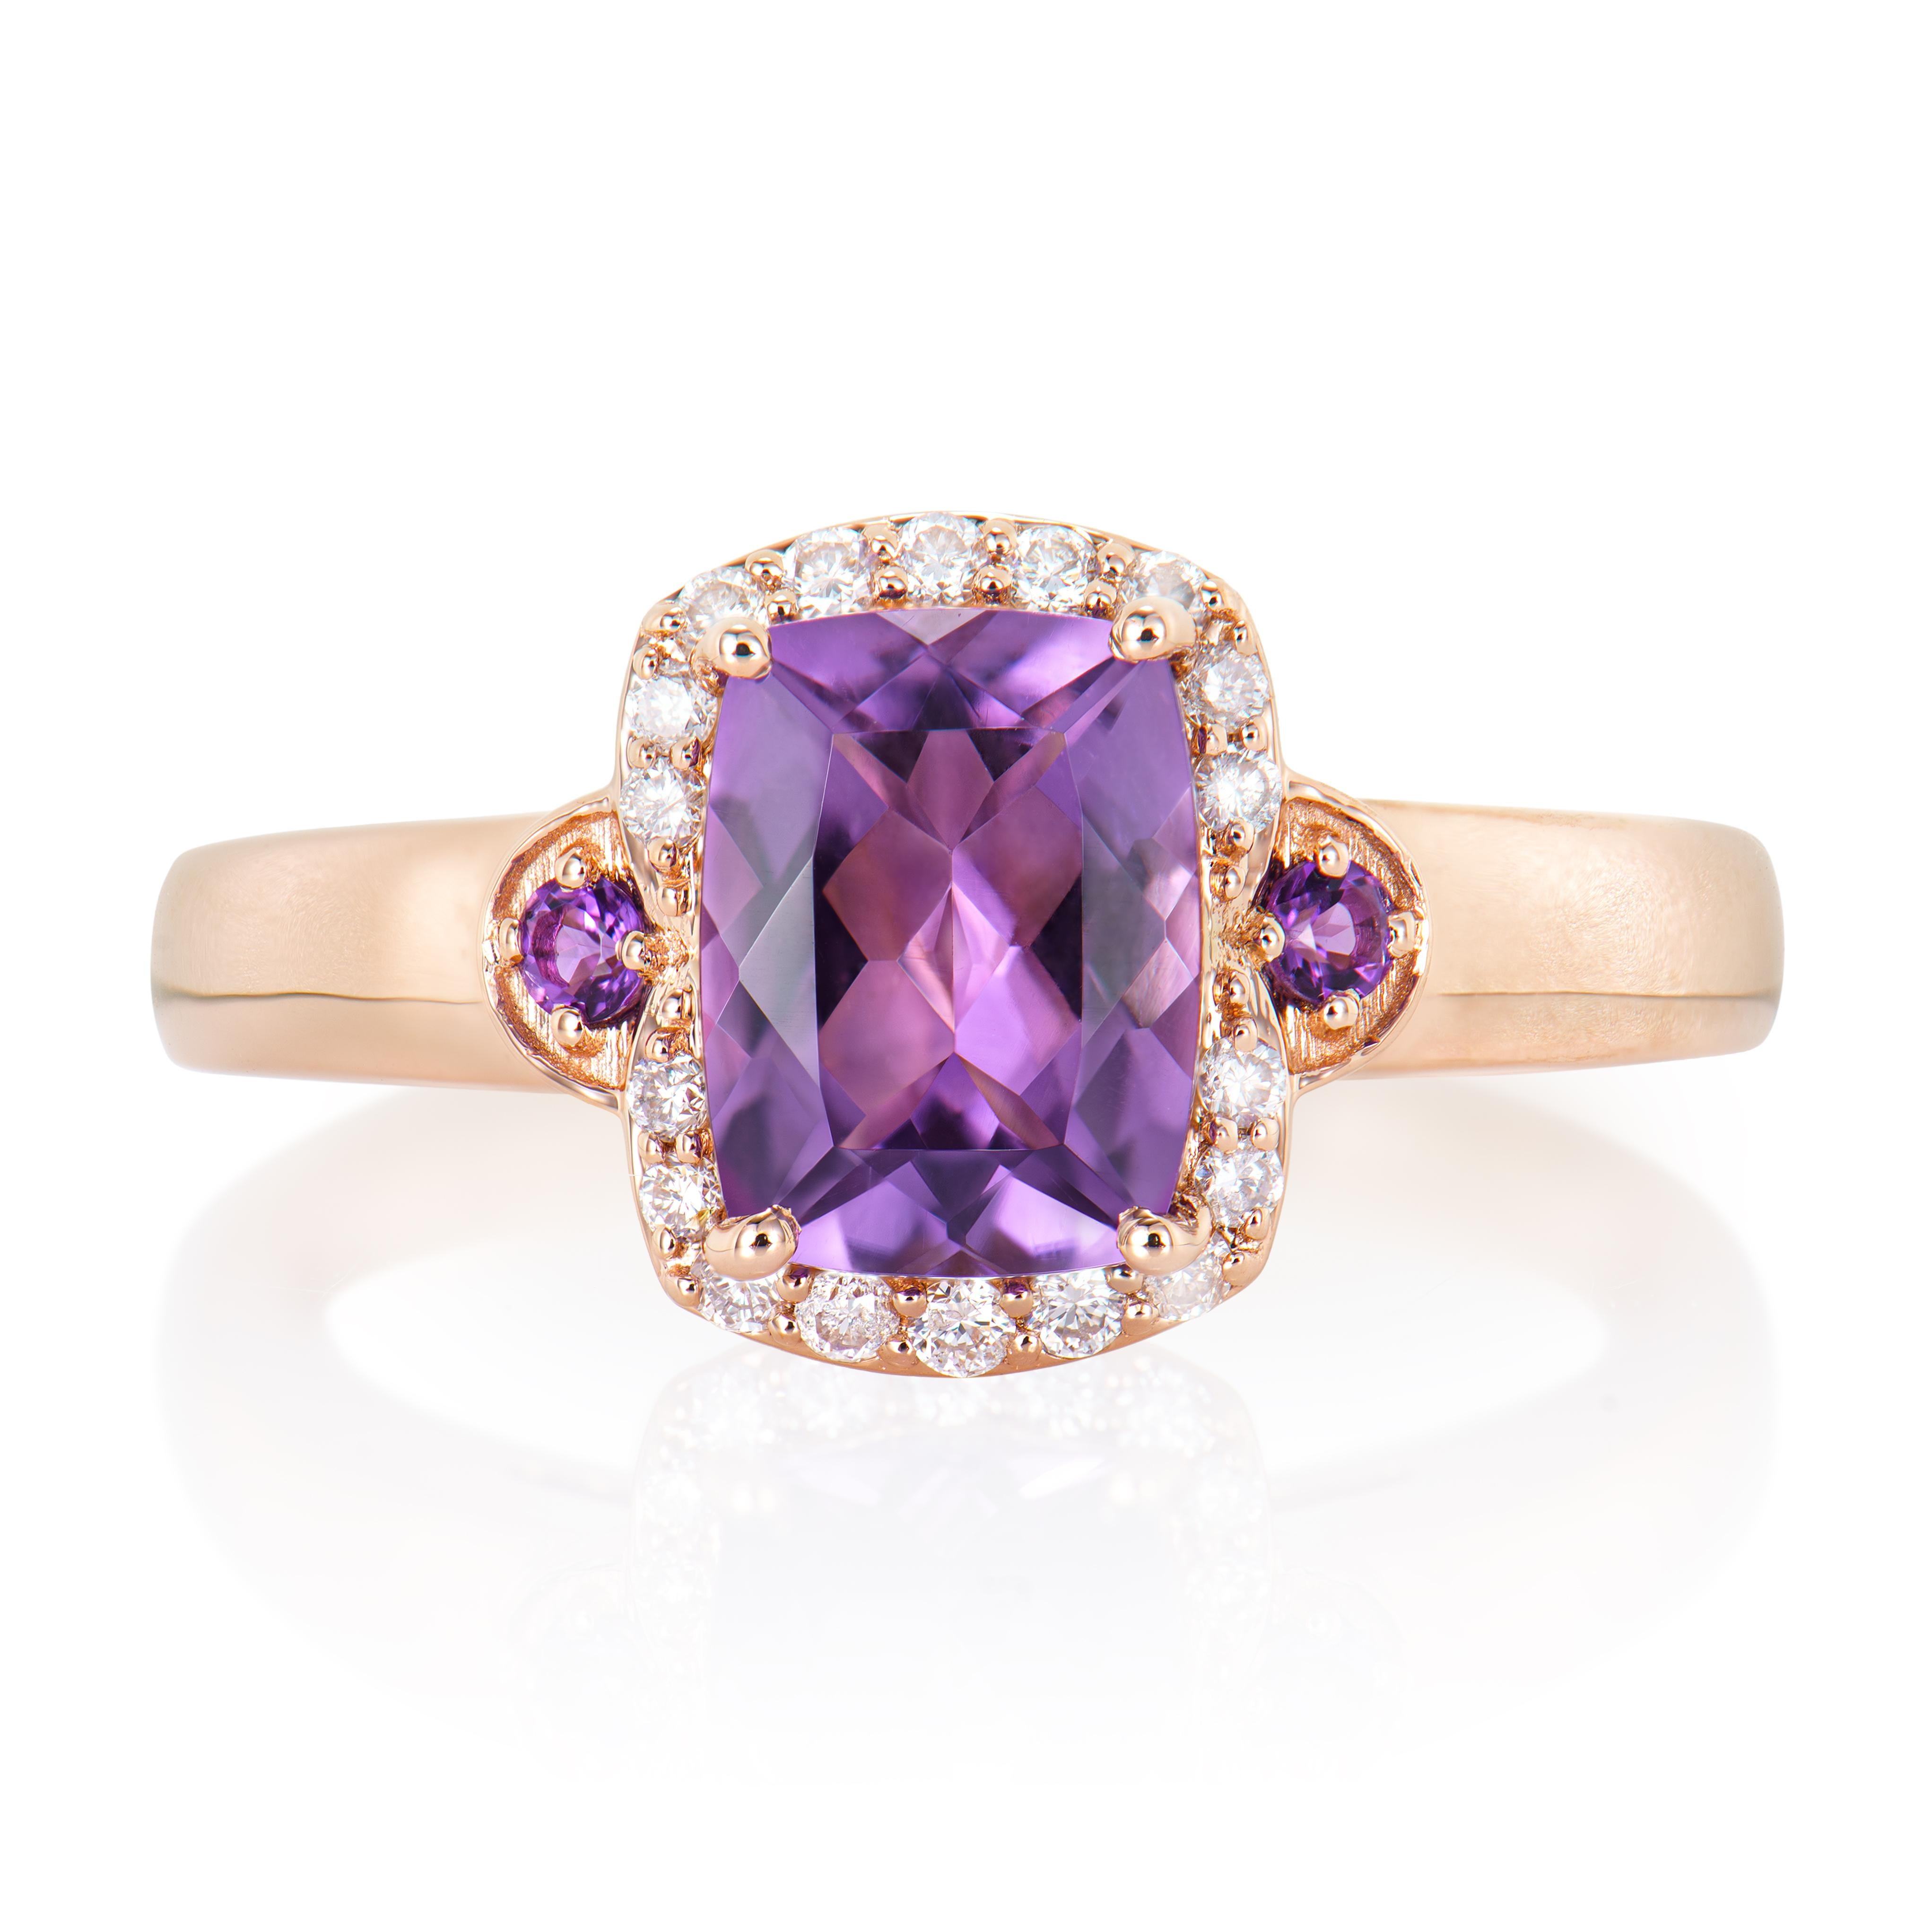 Contemporary 1.36 Carat Amethyst Fancy Ring in 14Karat Rose Gold with White Diamond.   For Sale